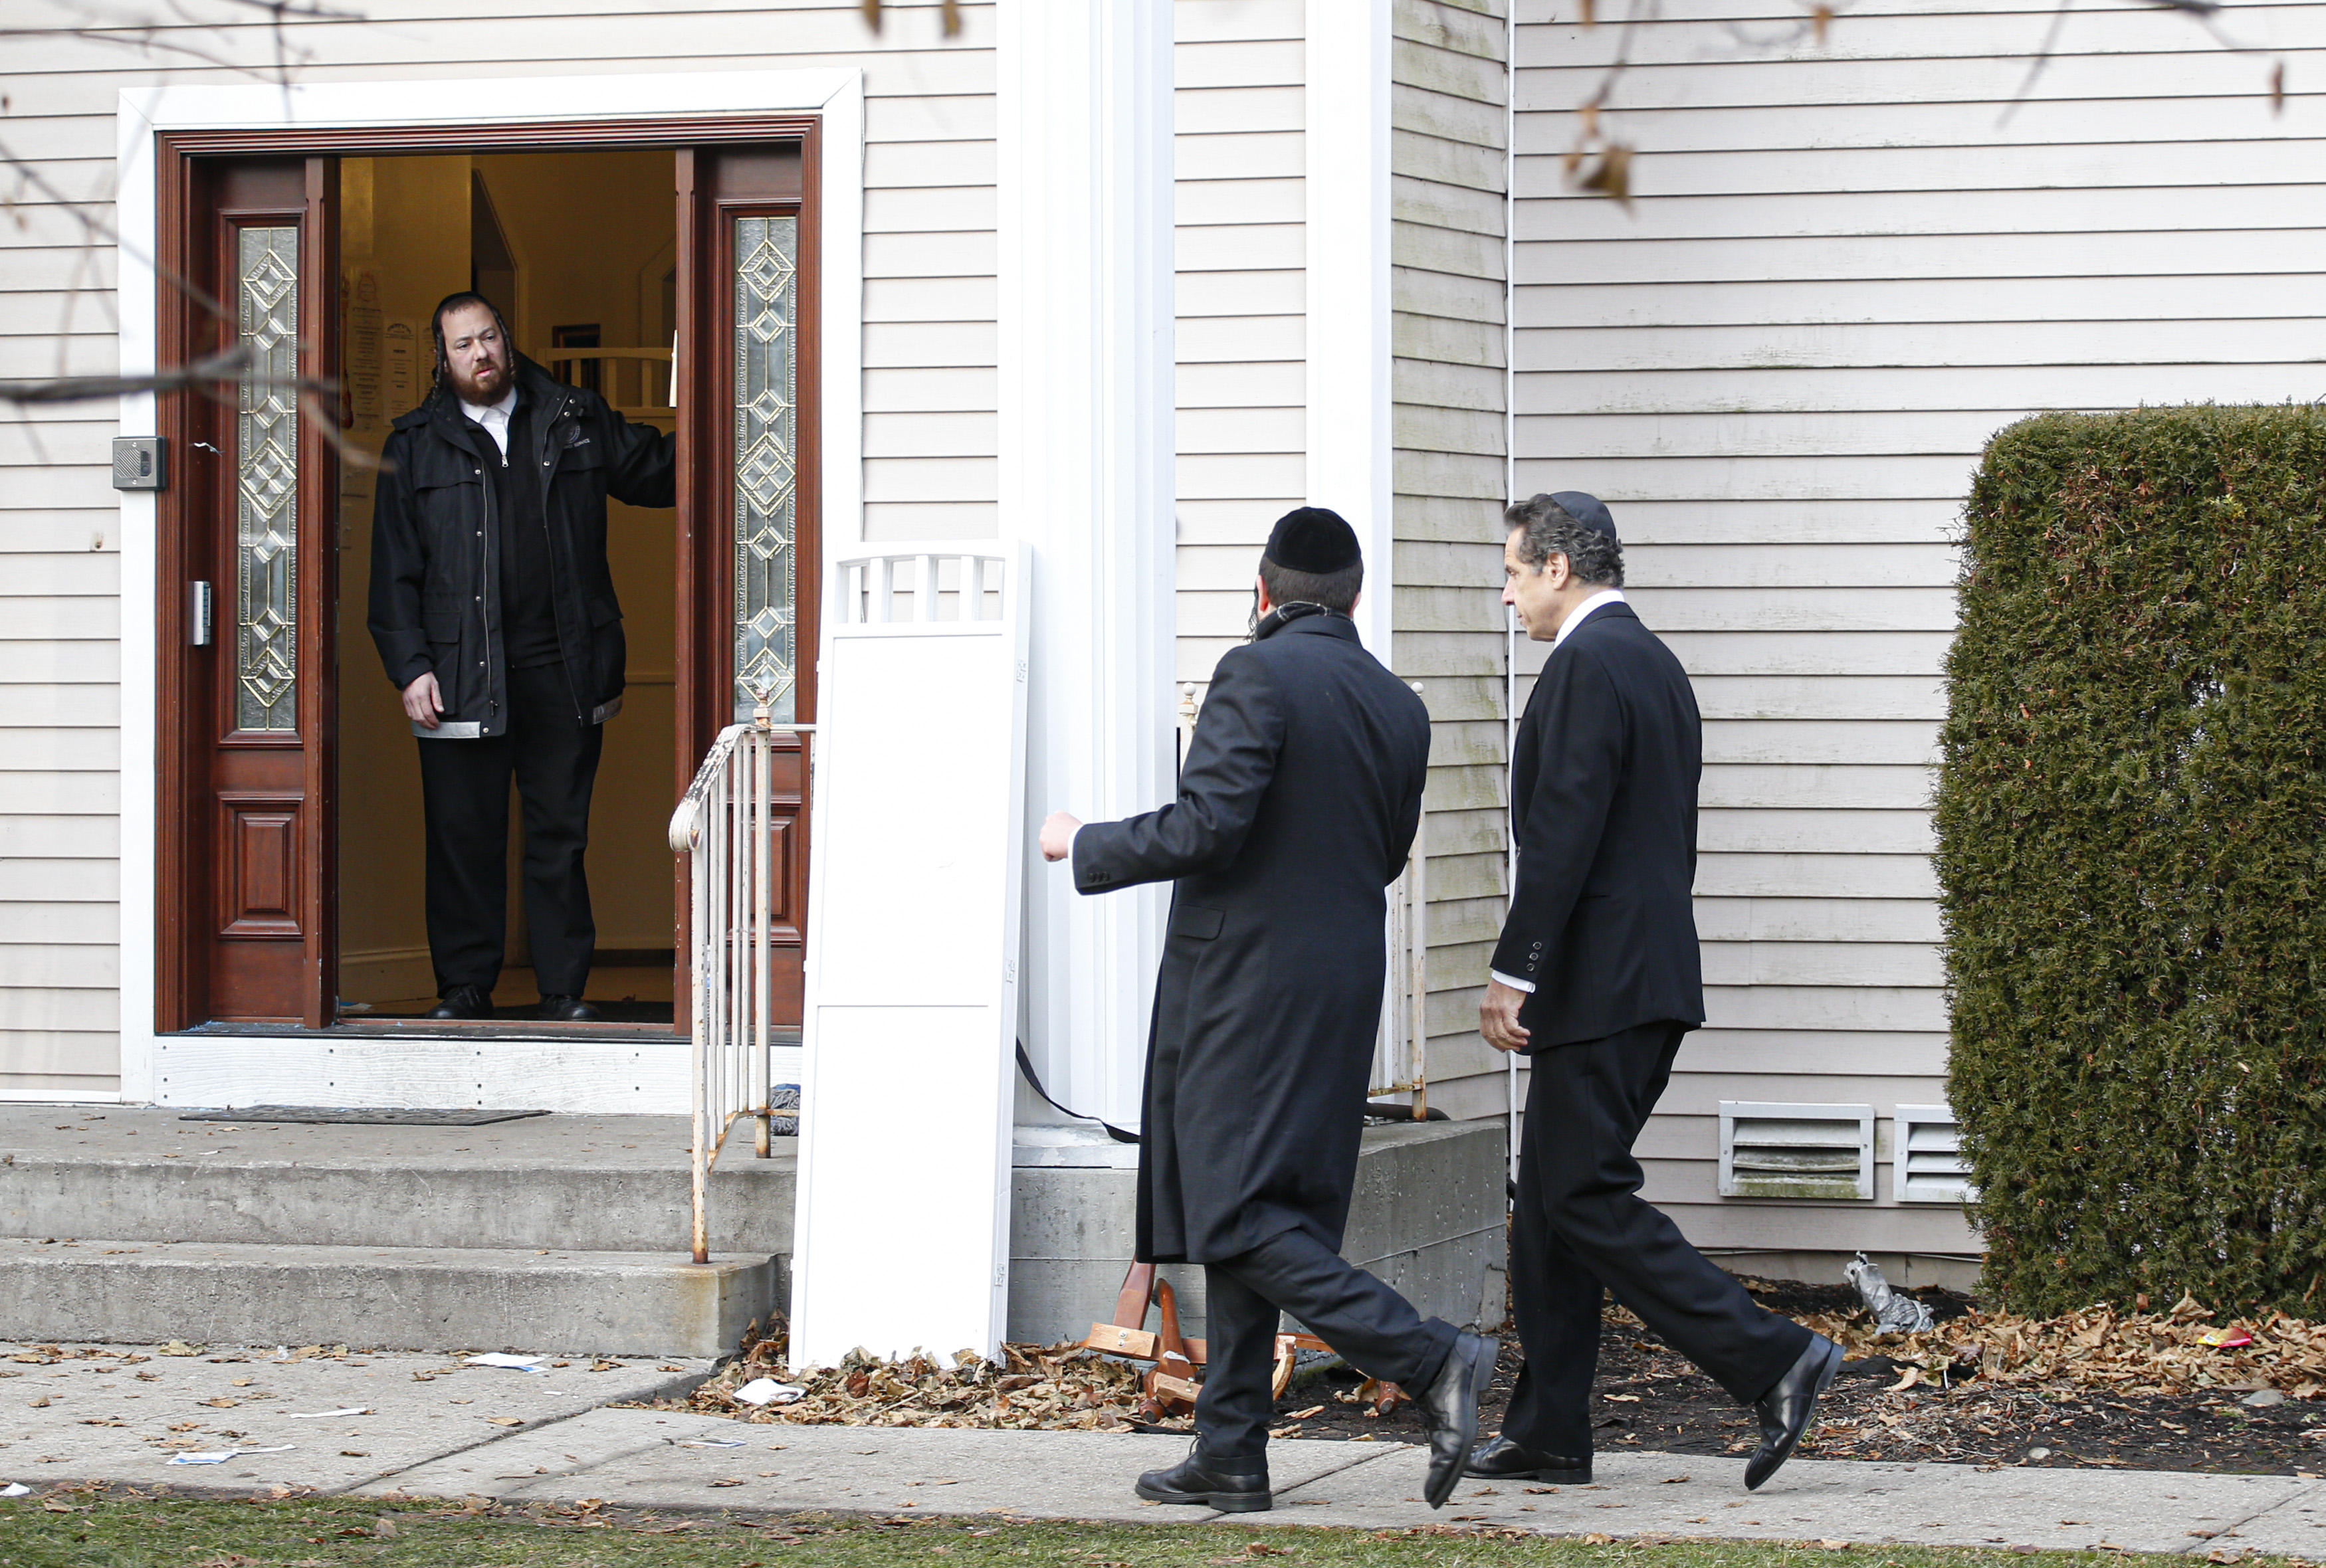 New York Governor Andrew Cuomo arrives to the home of rabbi, Chaim Rottenbergin Monsey, in New York on December 29, 2019 after a machete attack that took place earlier outside the rabbi's home during the Jewish festival of Hanukkah in Monsey, New York. - An intruder stabbed and wounded five people at a rabbi's house in New York during a gathering to celebrate the Jewish festival of Hanukkah late on December 28, 2019, officials and media reports said. Local police departments, speaking to AFP, declined to give the number of people injured, but a suspect has been taken into custody and a vehicle safeguarded, an NYPD spokesman said. (Photo by KENA BETANCUR/AFP via Getty Images)